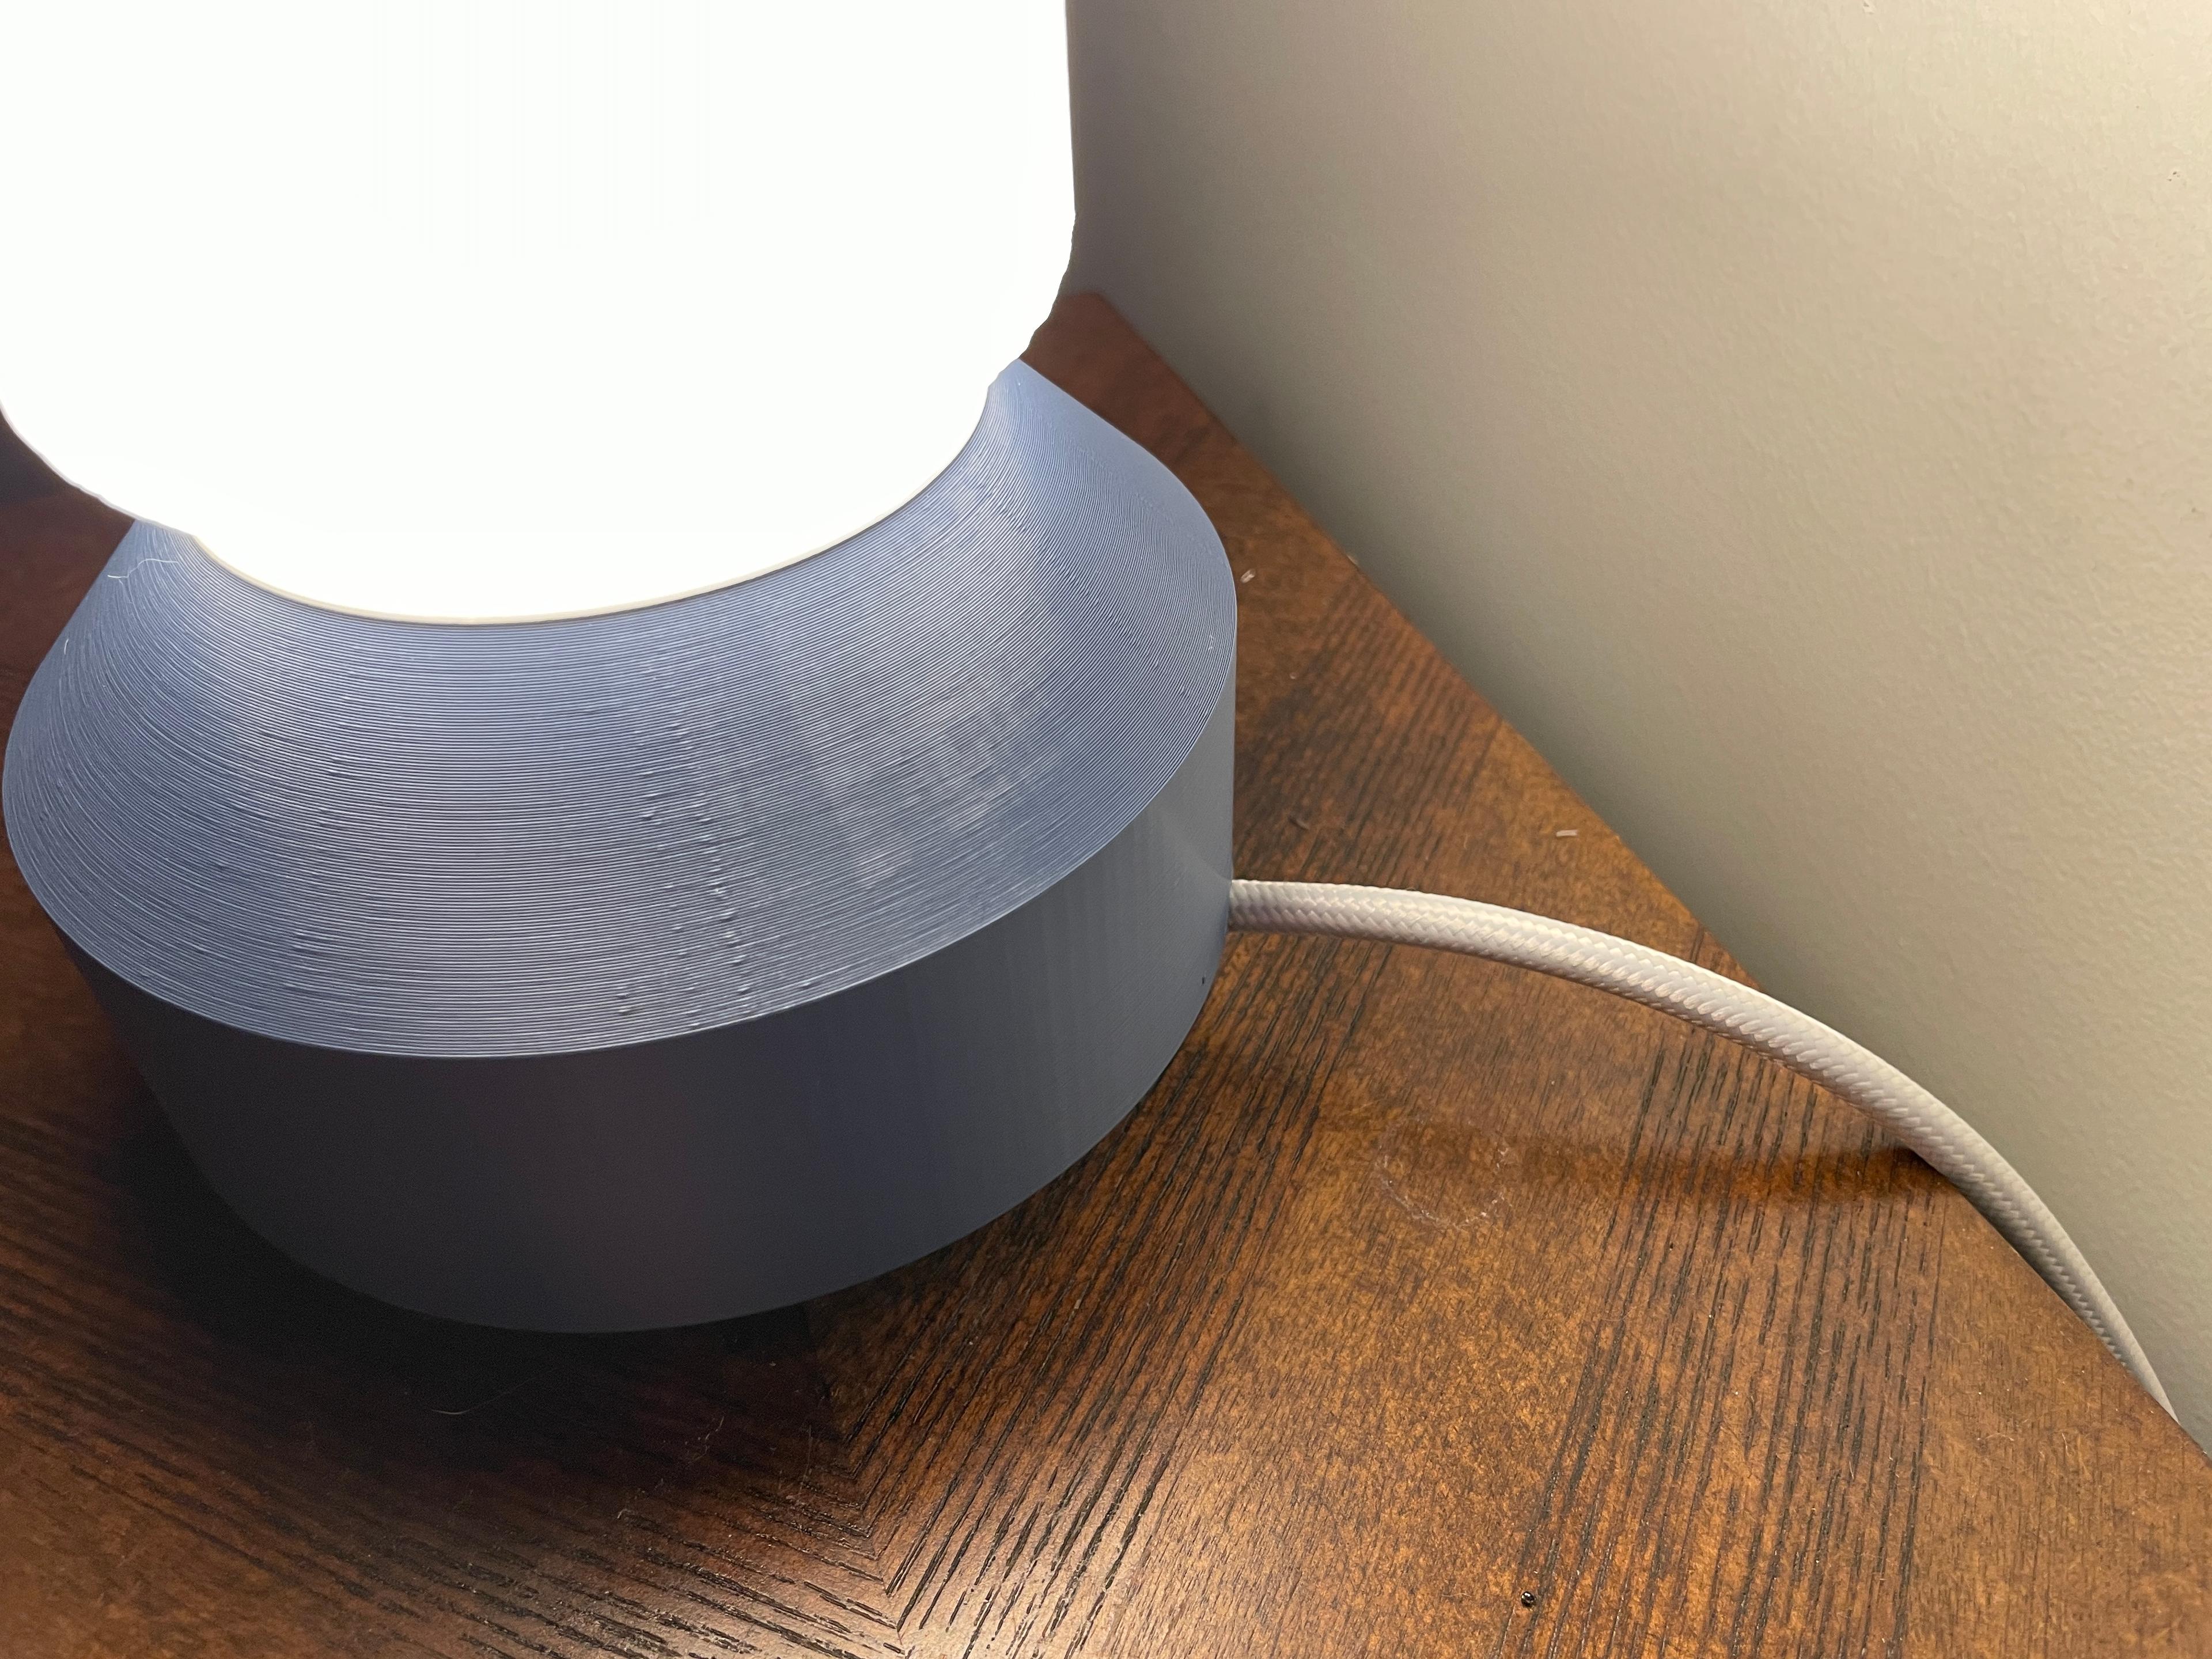 Modern Table Lamp - Photo of the cord coming out of the lamp  - 3d model